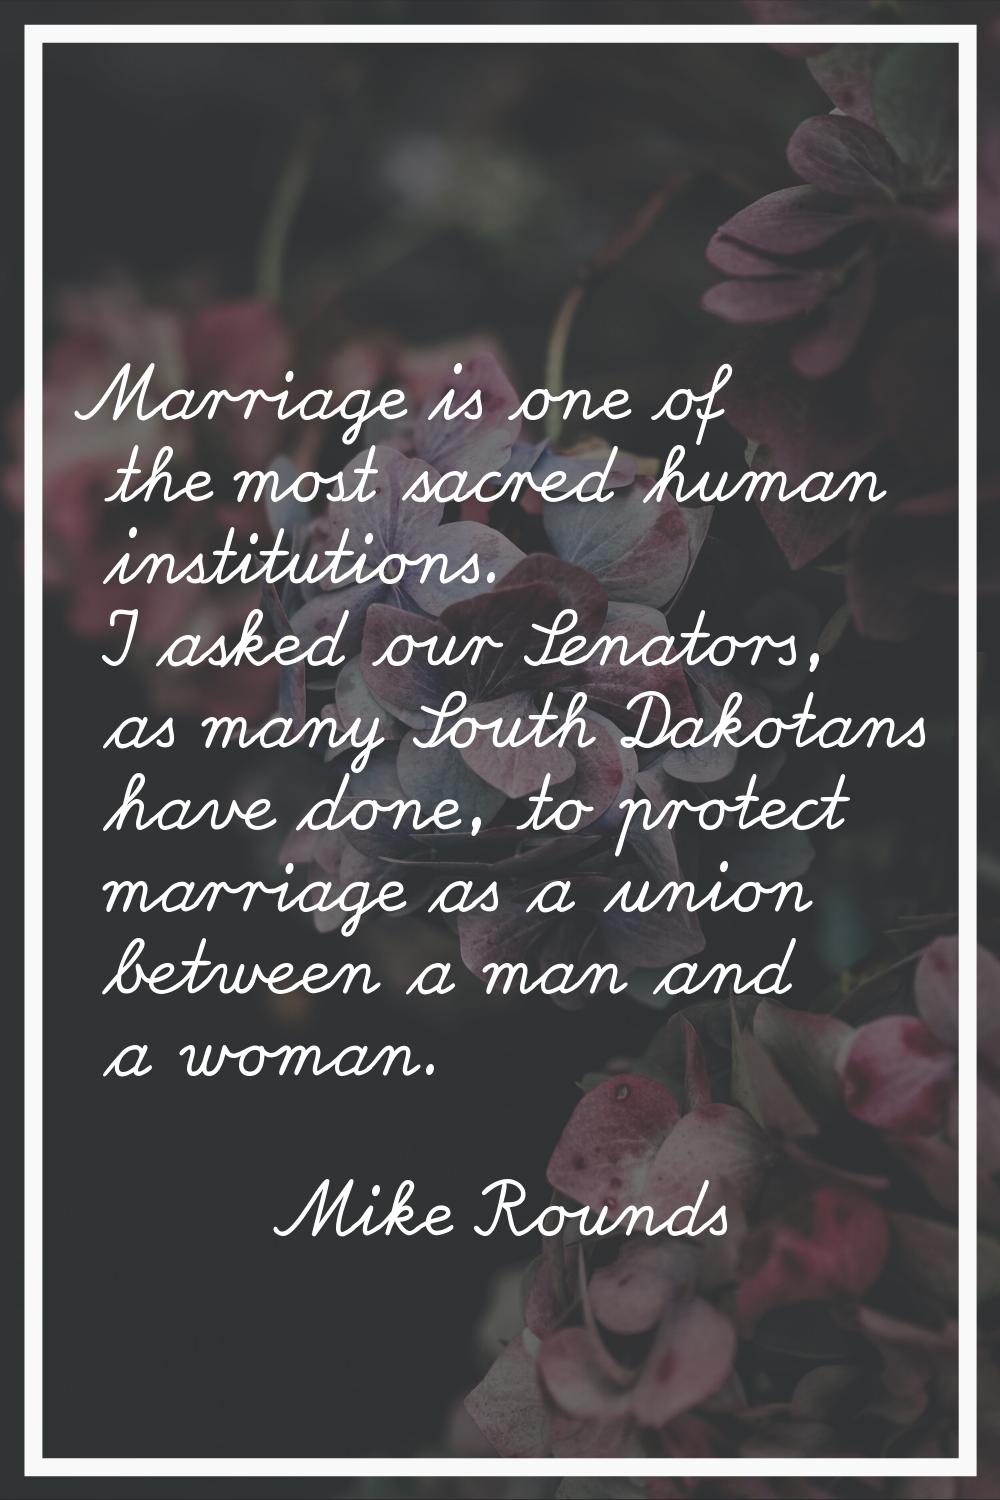 Marriage is one of the most sacred human institutions. I asked our Senators, as many South Dakotans